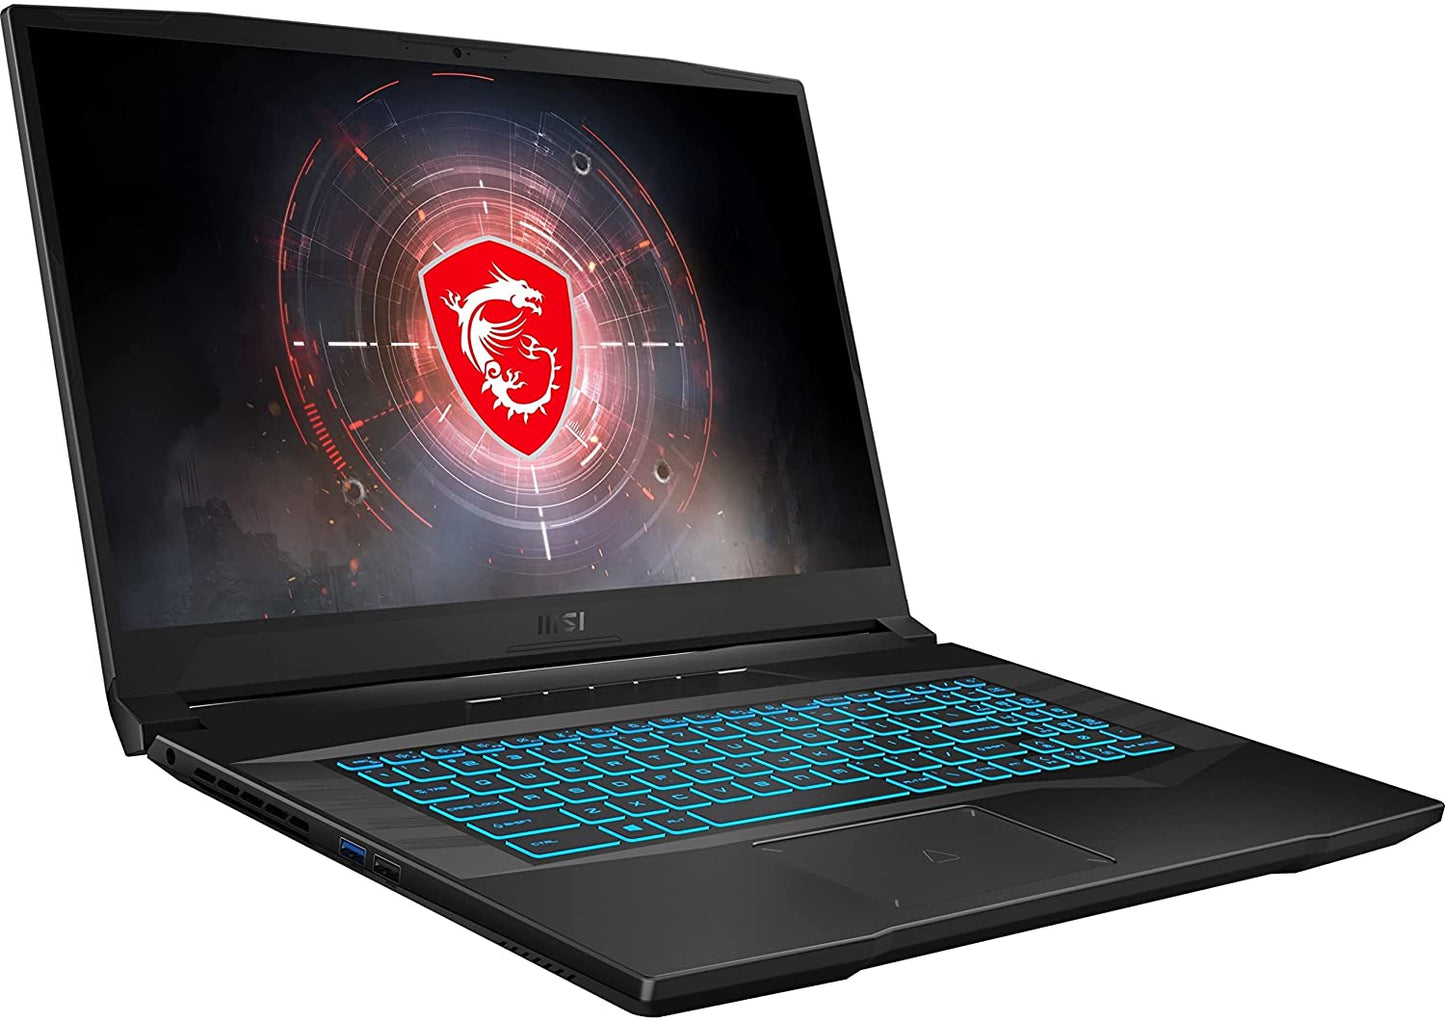 MSI Crosshair 17 Crosshair A11UDK-645 17.3-in Gaming Laptop Computer i7 2.40 GHz 16 GB 512 GB SSD - Titanium Gray